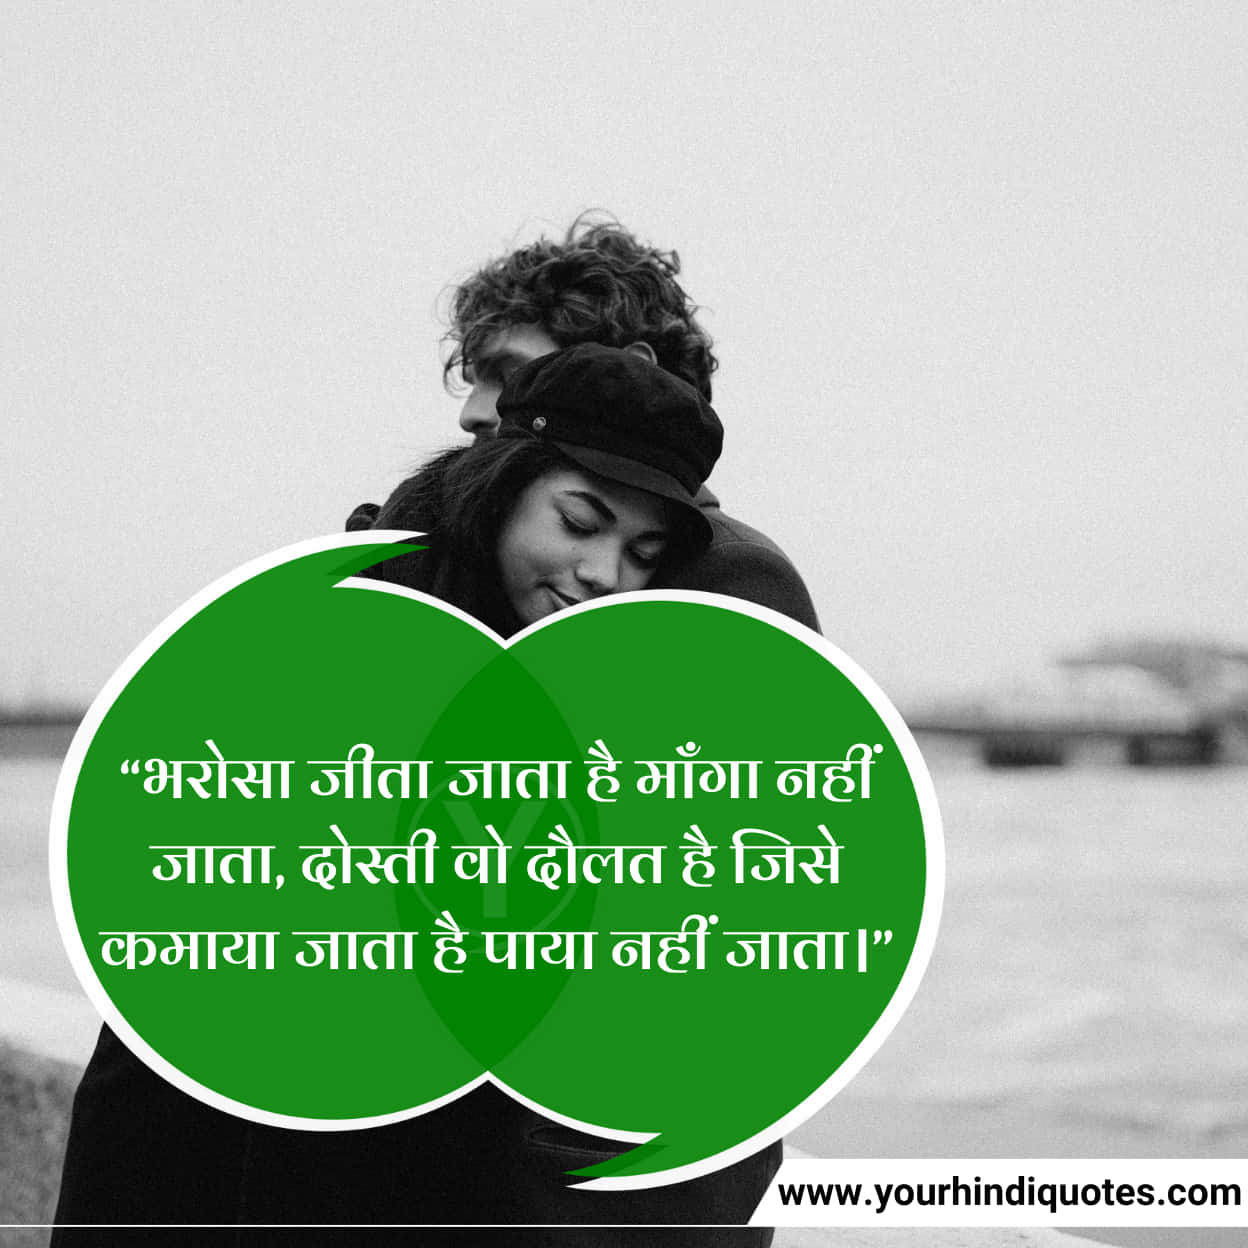 Best Friendship Day Quotes In Hindi